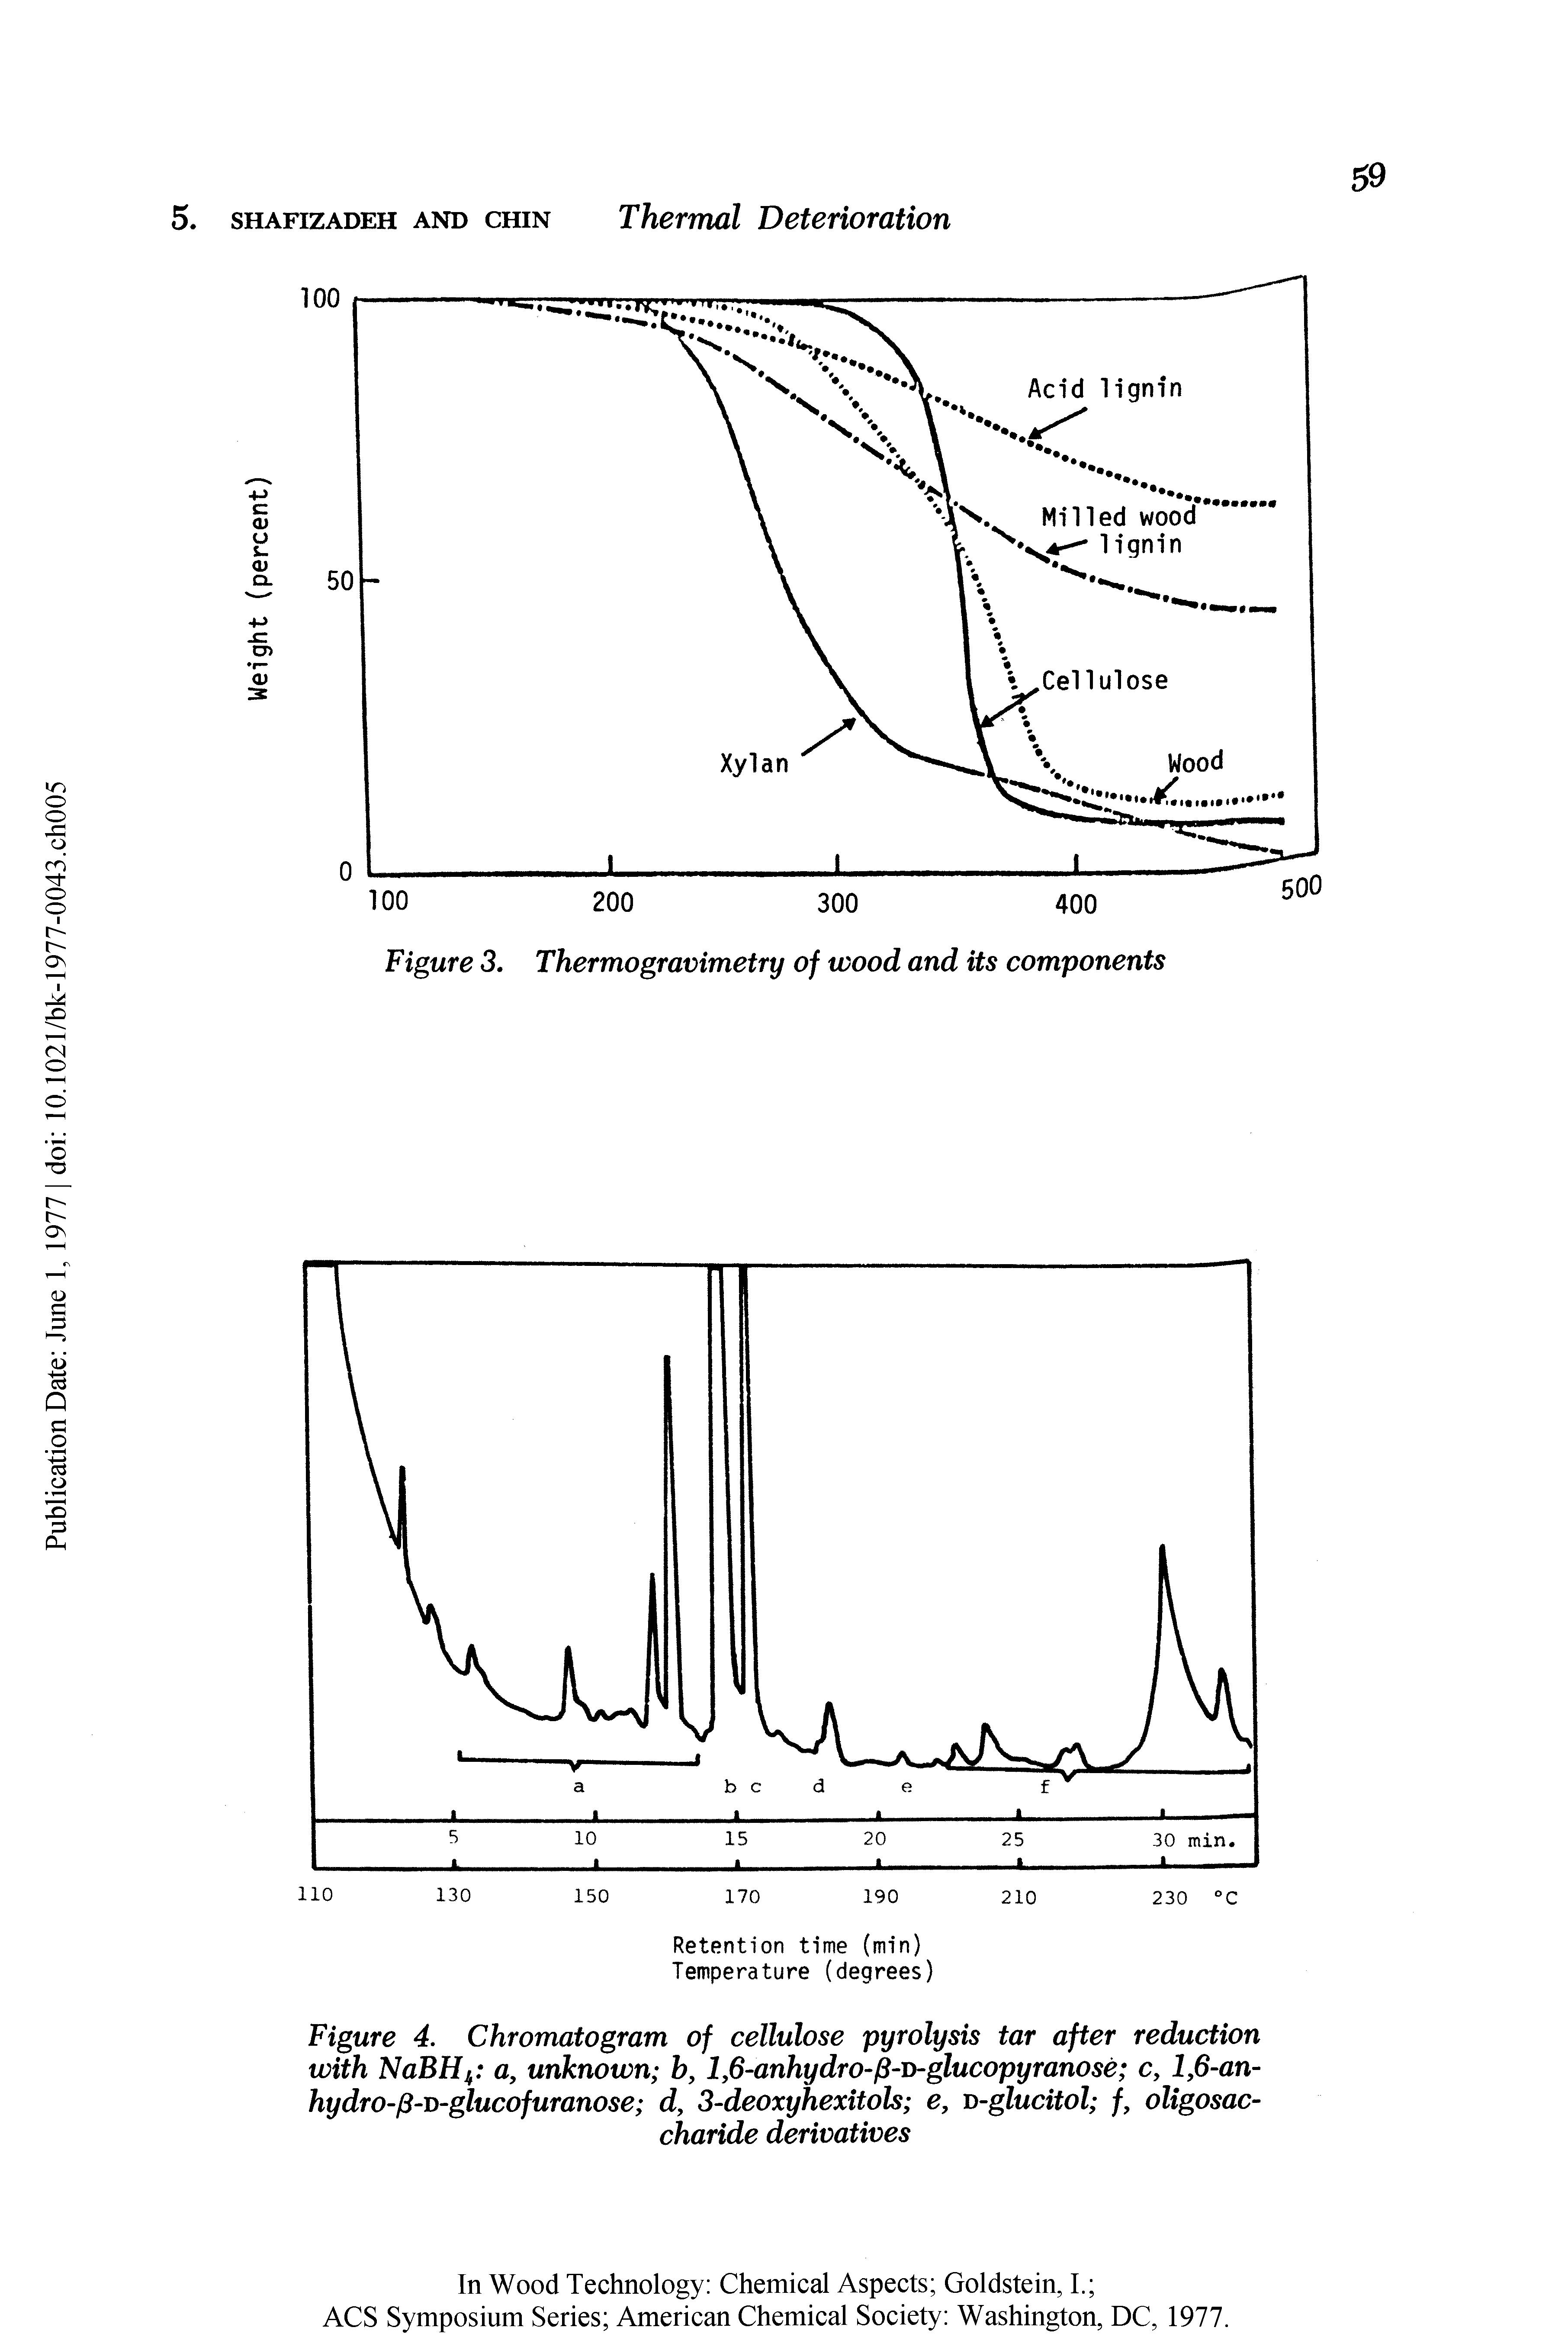 Figure 4. Chromatogram of cellulose pyrolysis tar after reduction with NaBHa, unknown b, 1,6-anhydro-p-n-glucopyranose c, 1,6-an-hydro-p-v-glucofuranose d, 3-deoxyhexitols e, d-glucitol f, oligosaccharide derivatives...